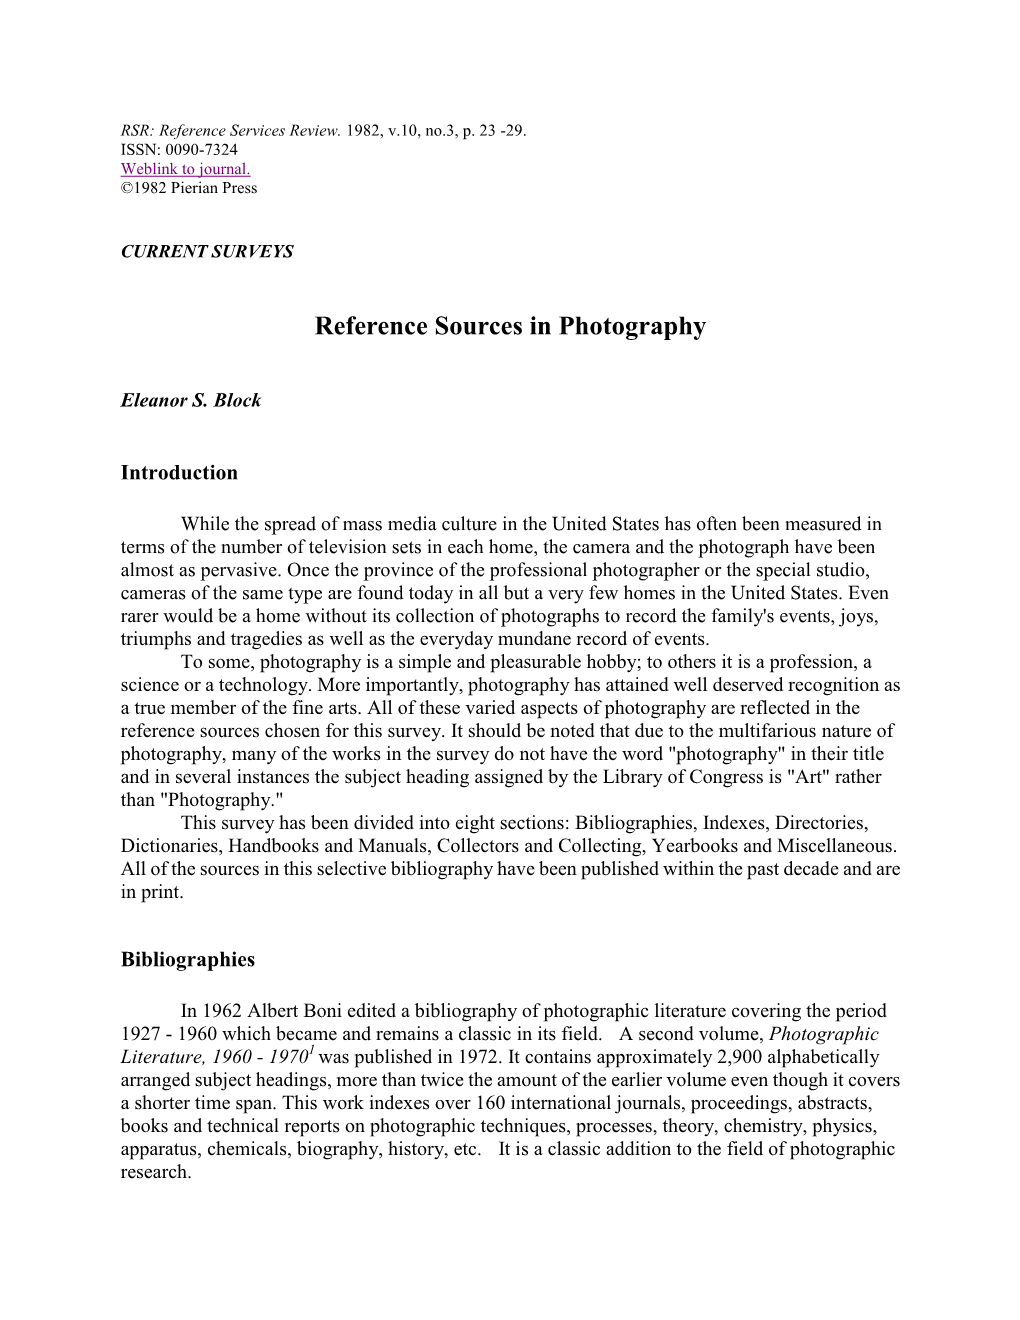 Reference Sources in Photography